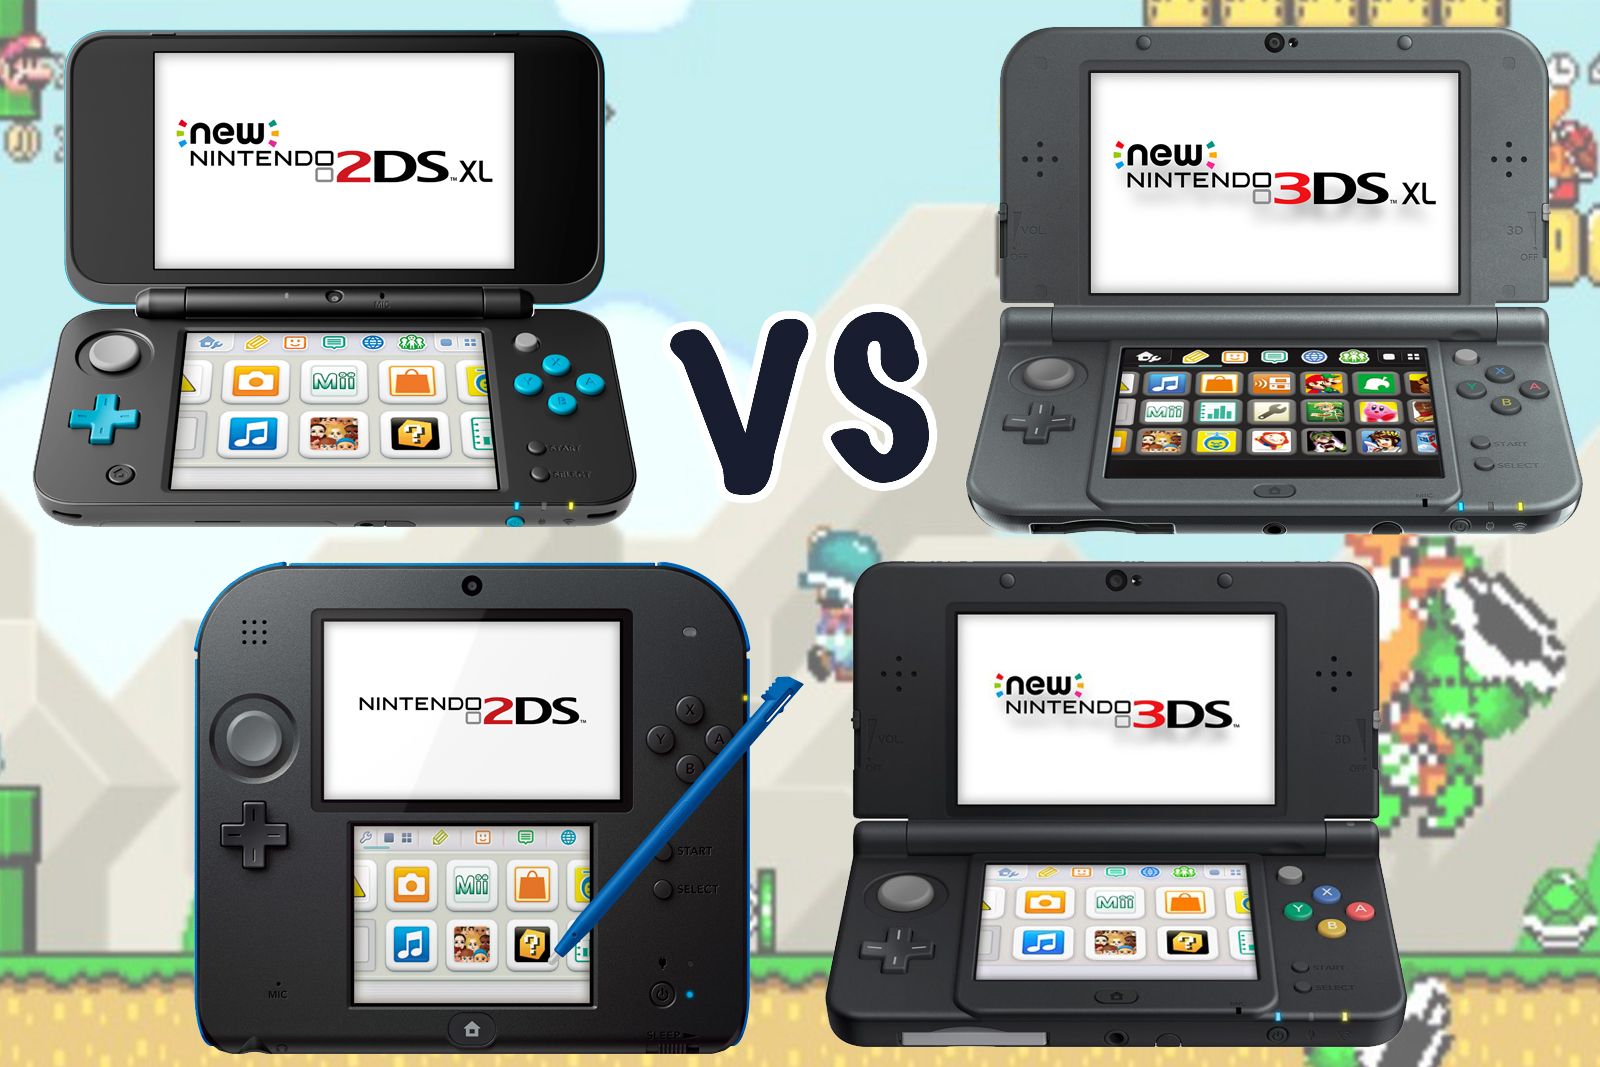 2DS XL vs vs vs 3DS XL: What's the difference?